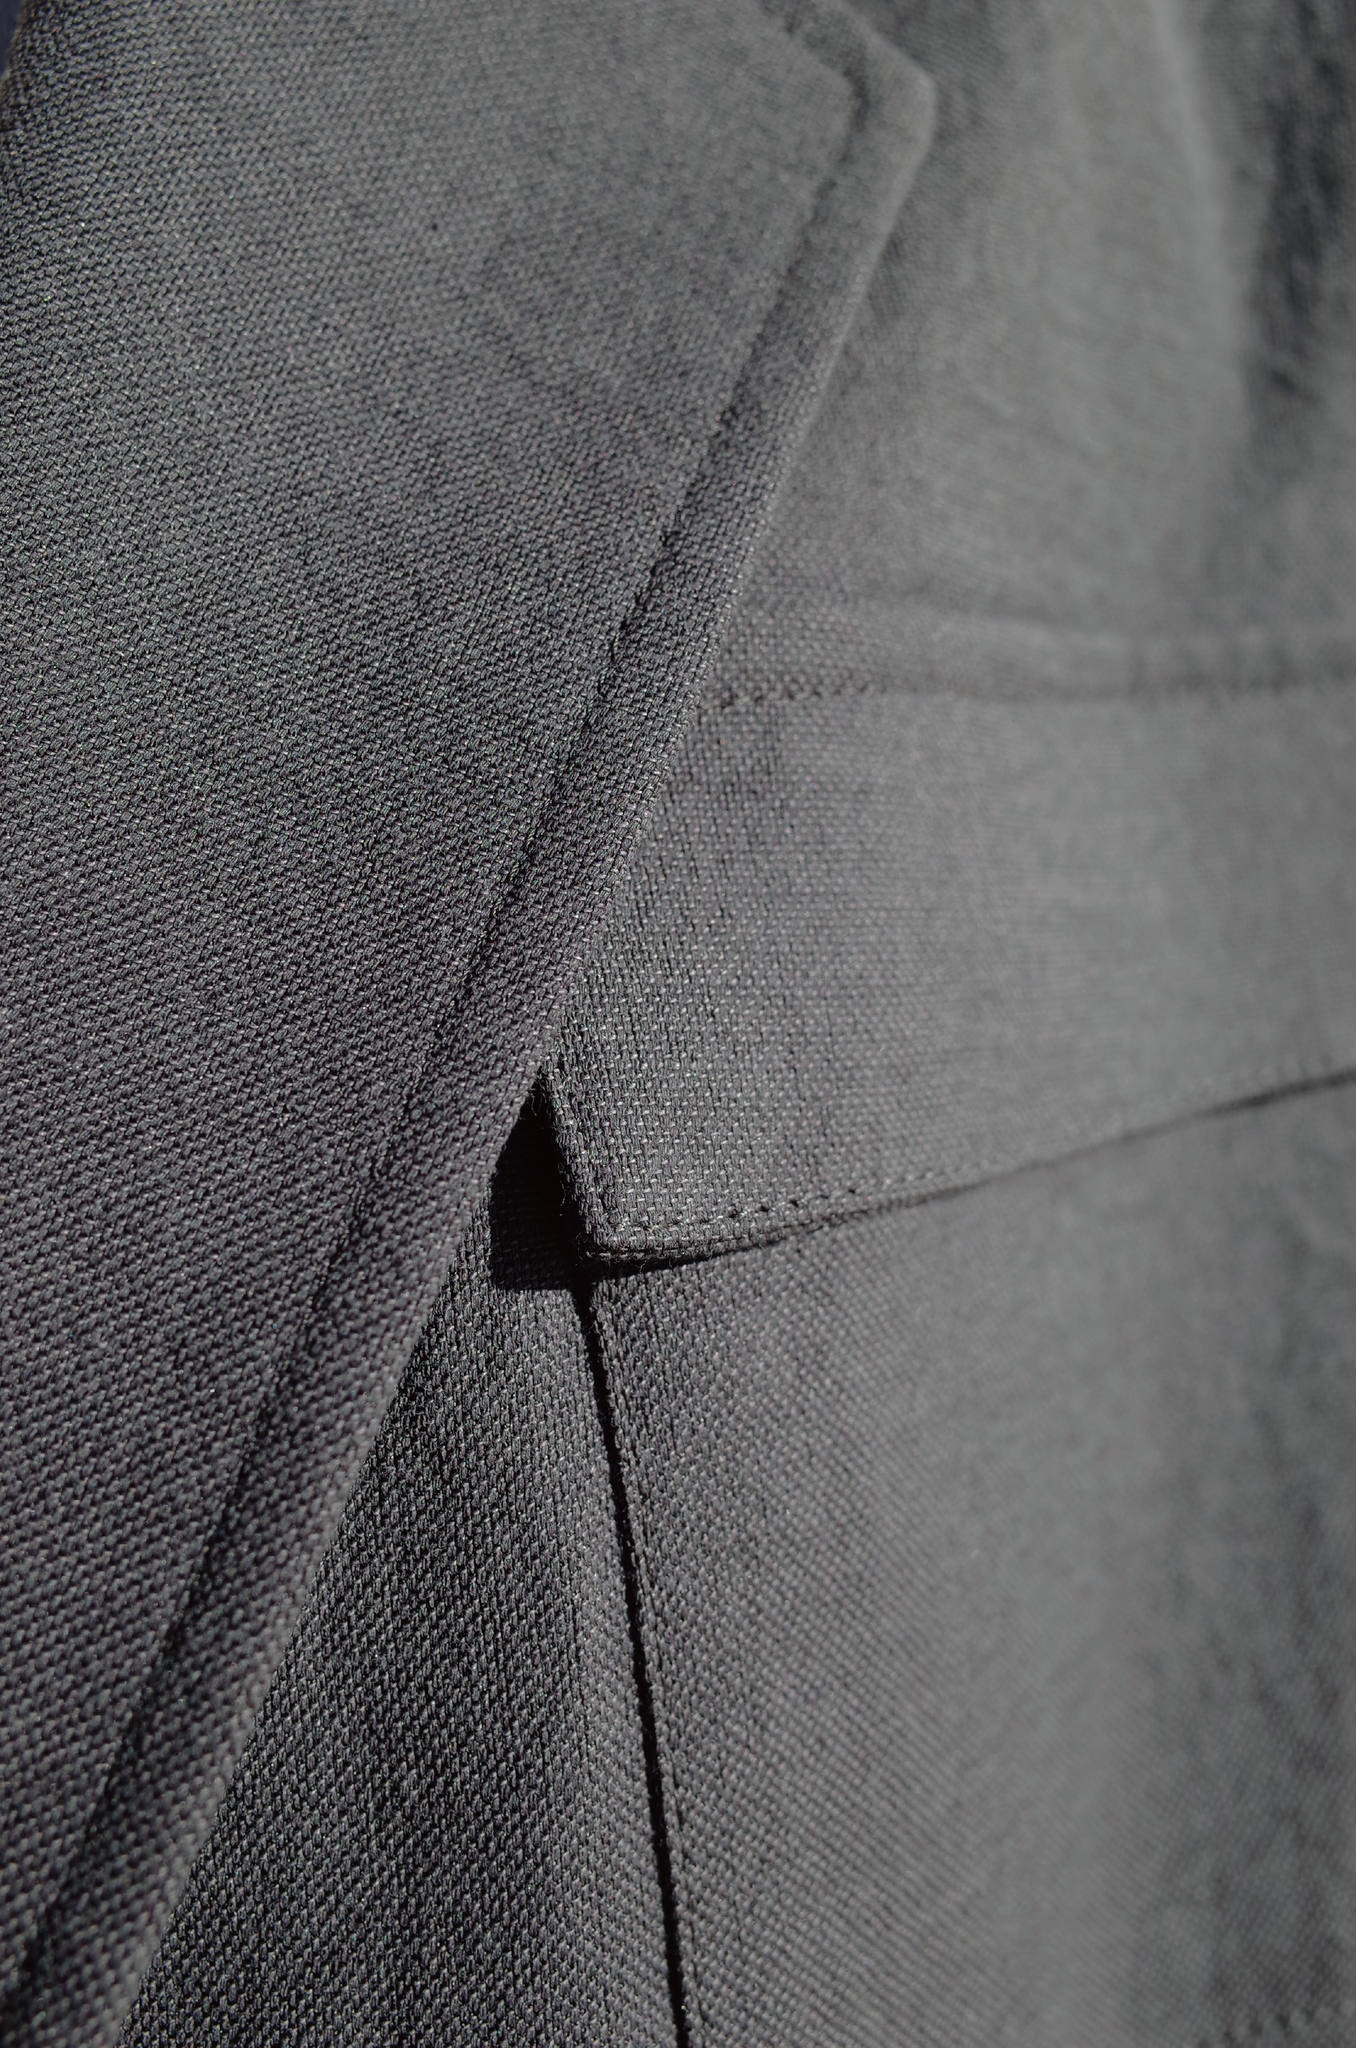 ・ Reserved items ・ Linen Gray Fine Jacket